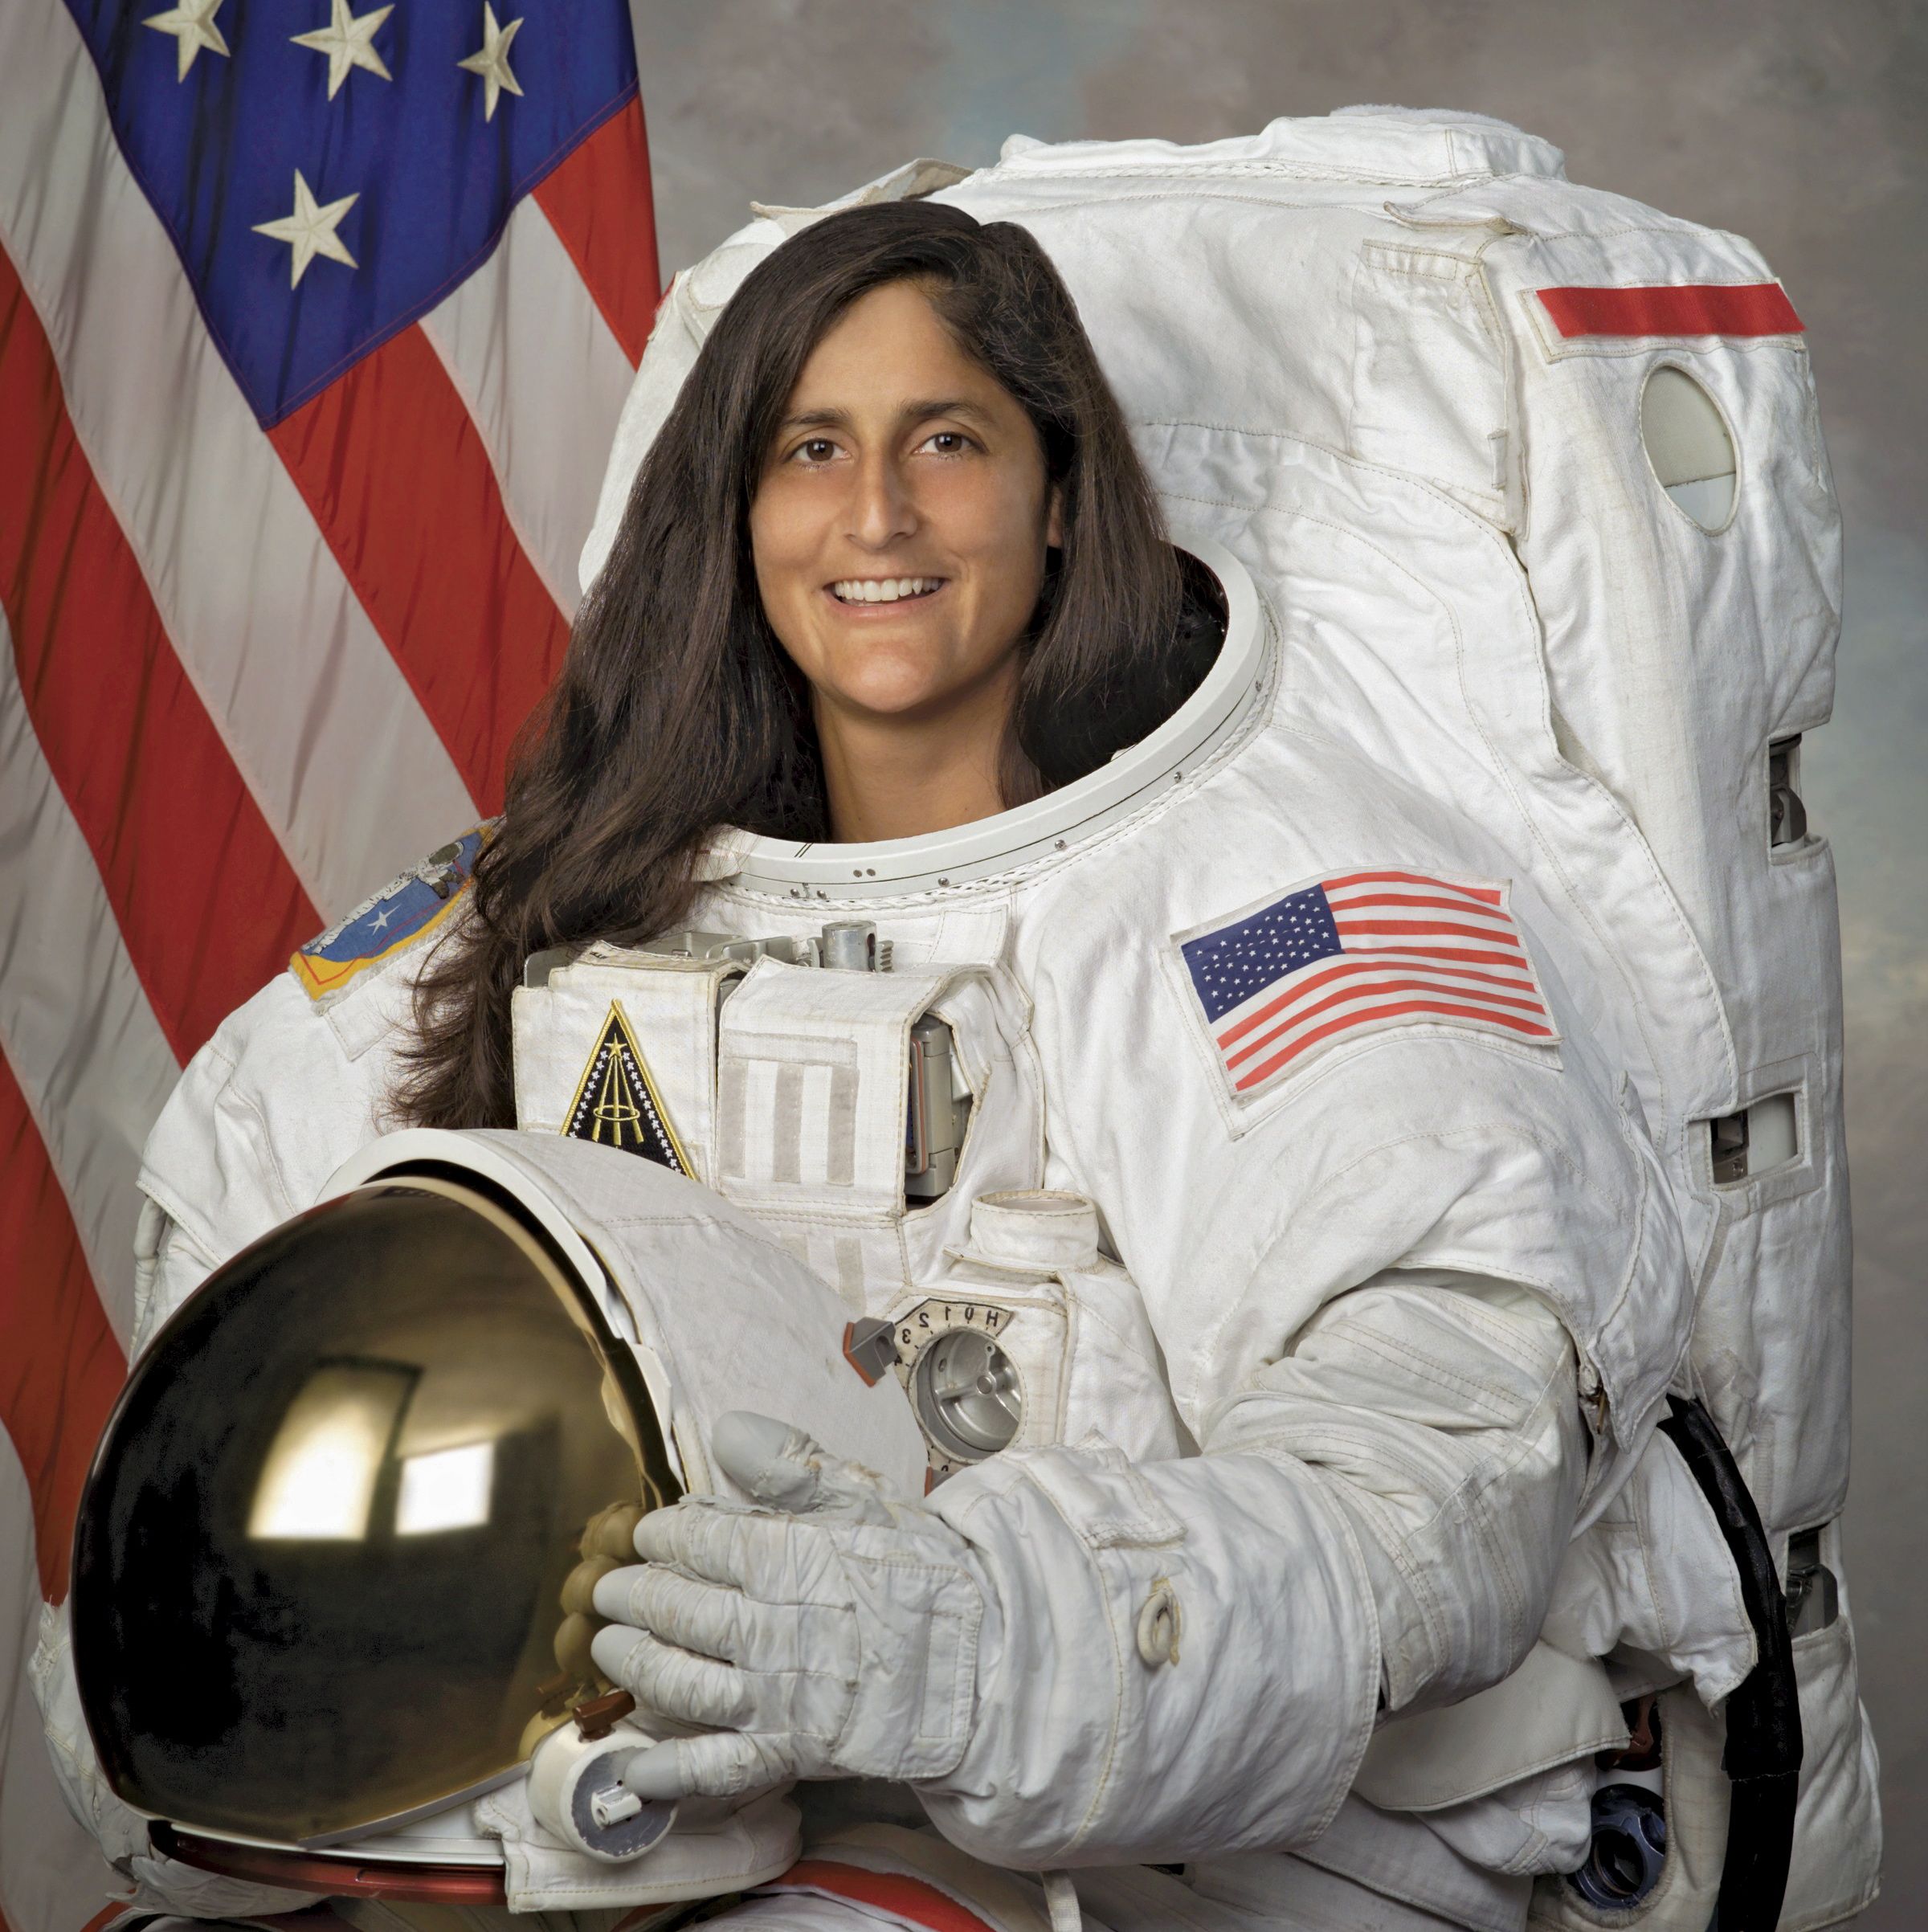 We Spoke to Suni Williams, the First Test Pilot for Boeing's Starliner, About All Things Space